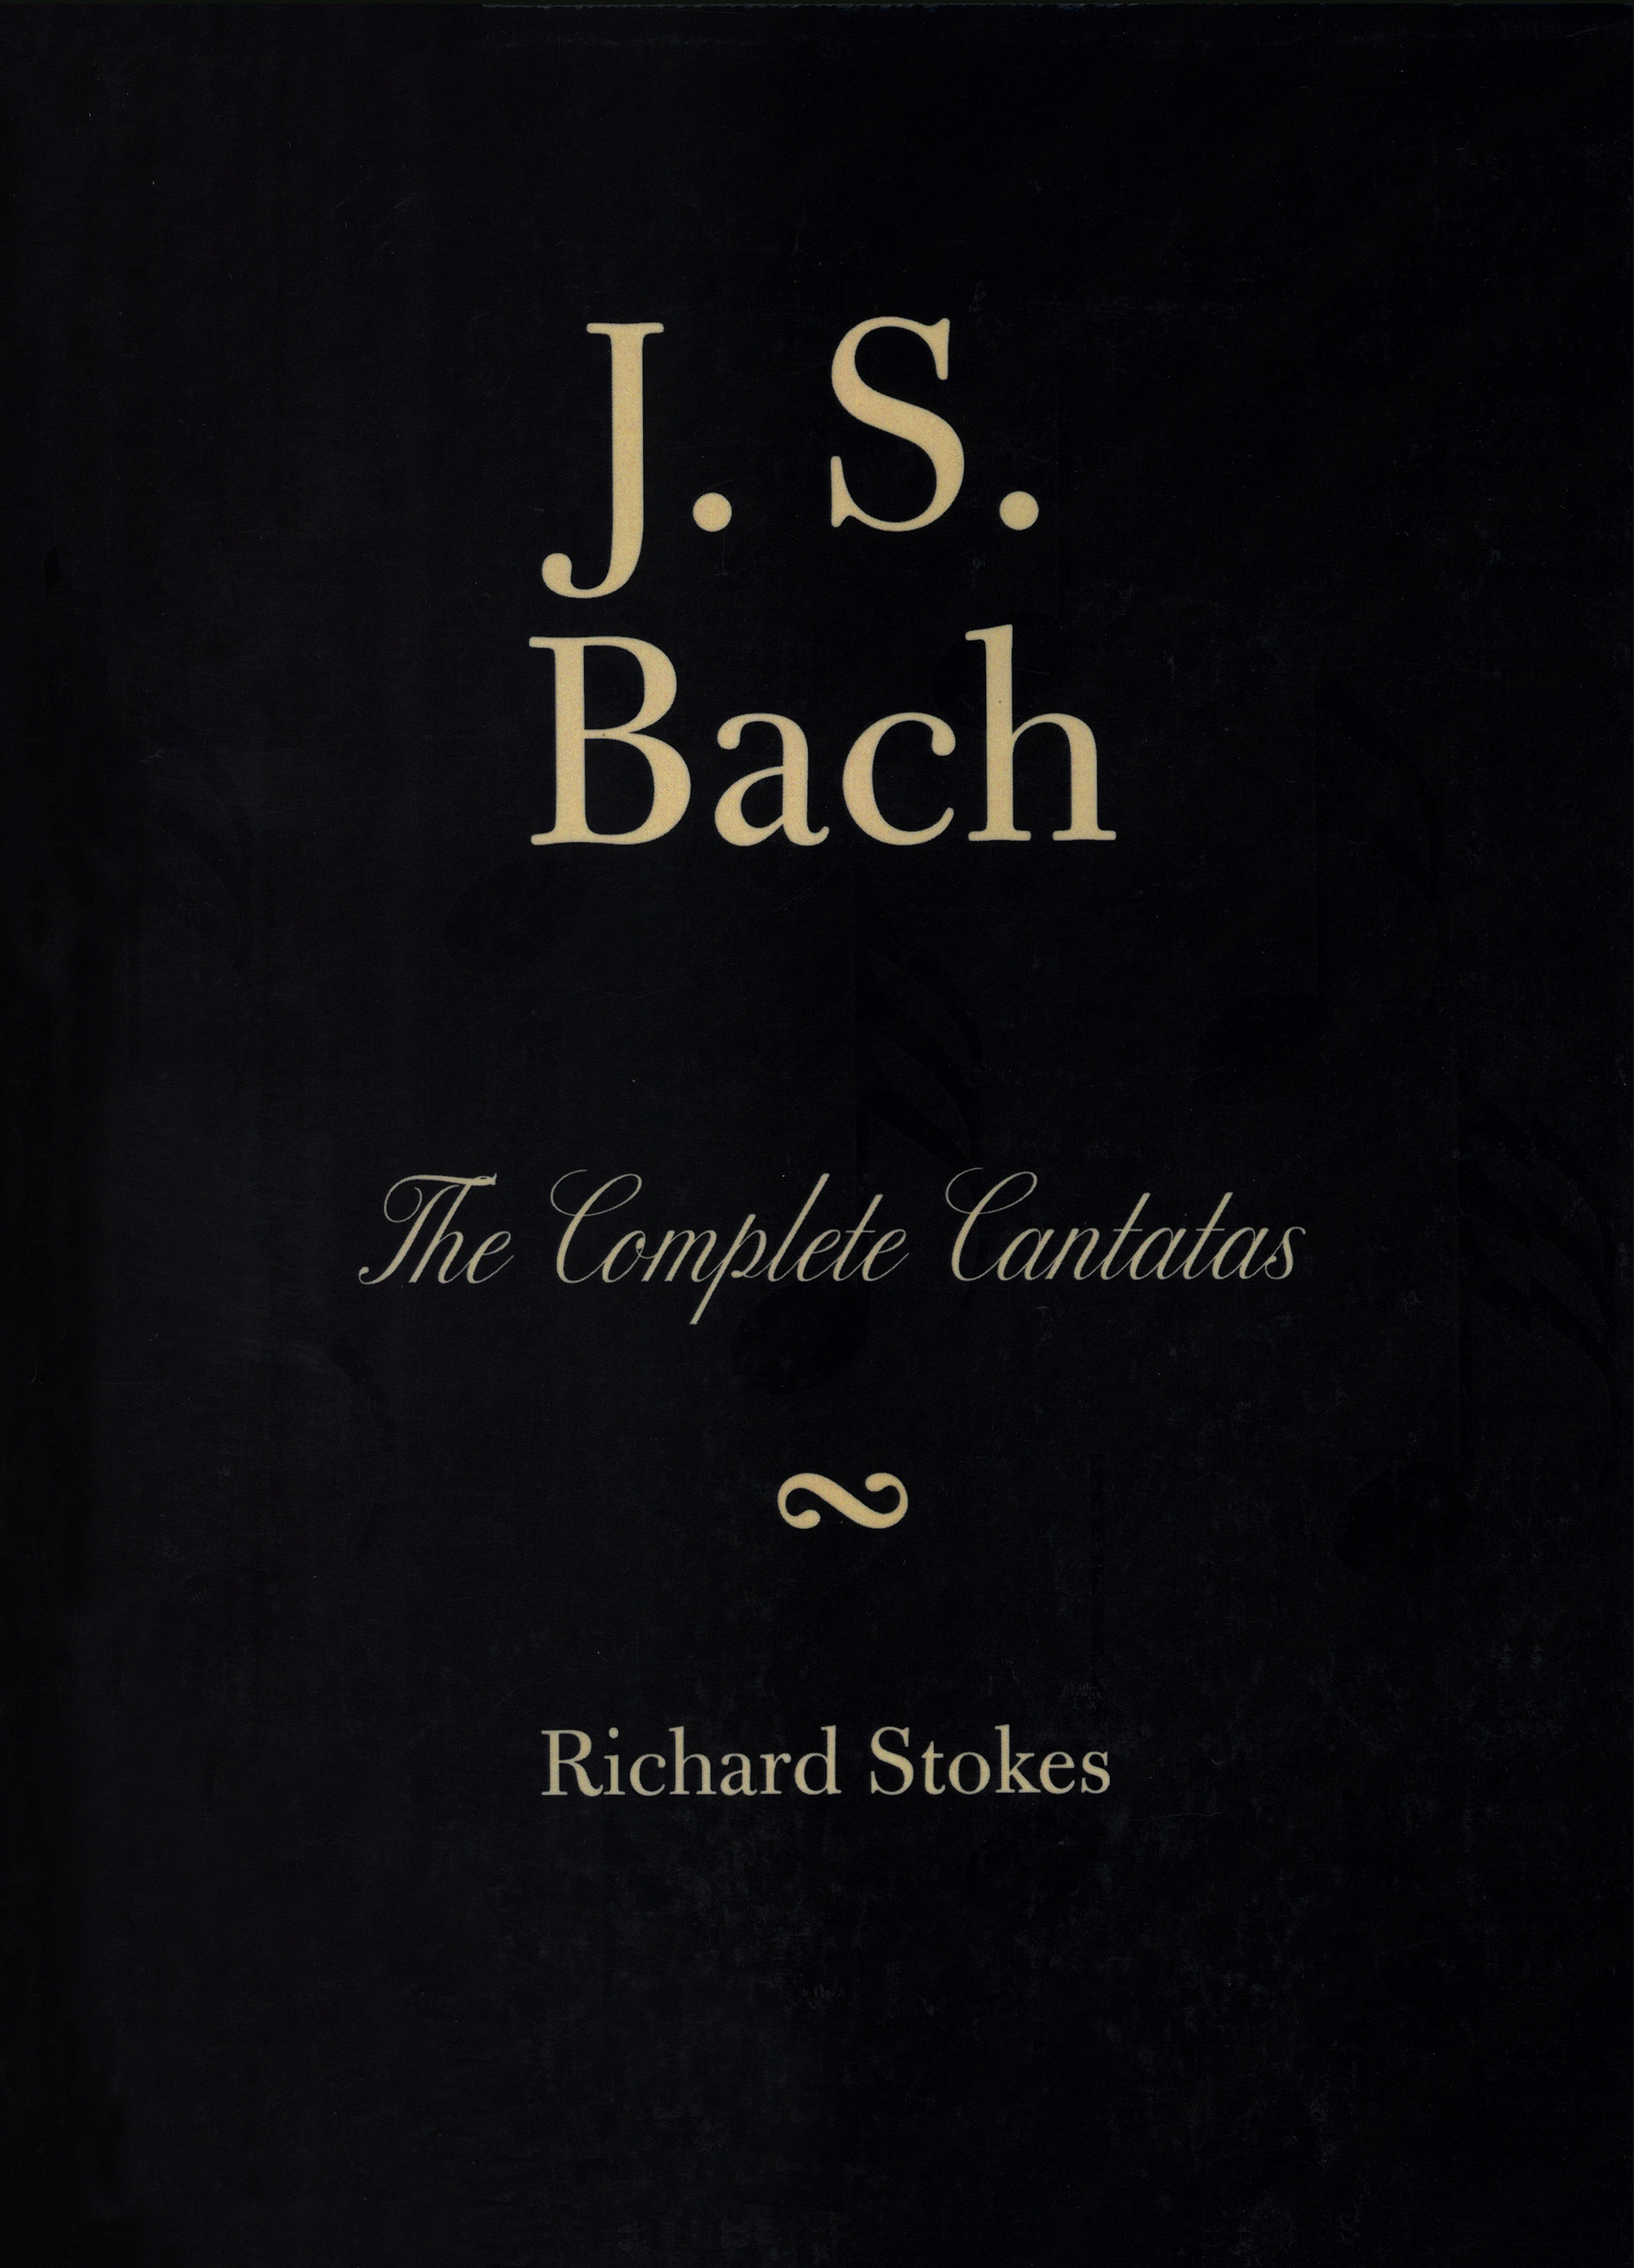 J.S. Bach: The Complete Cantatas